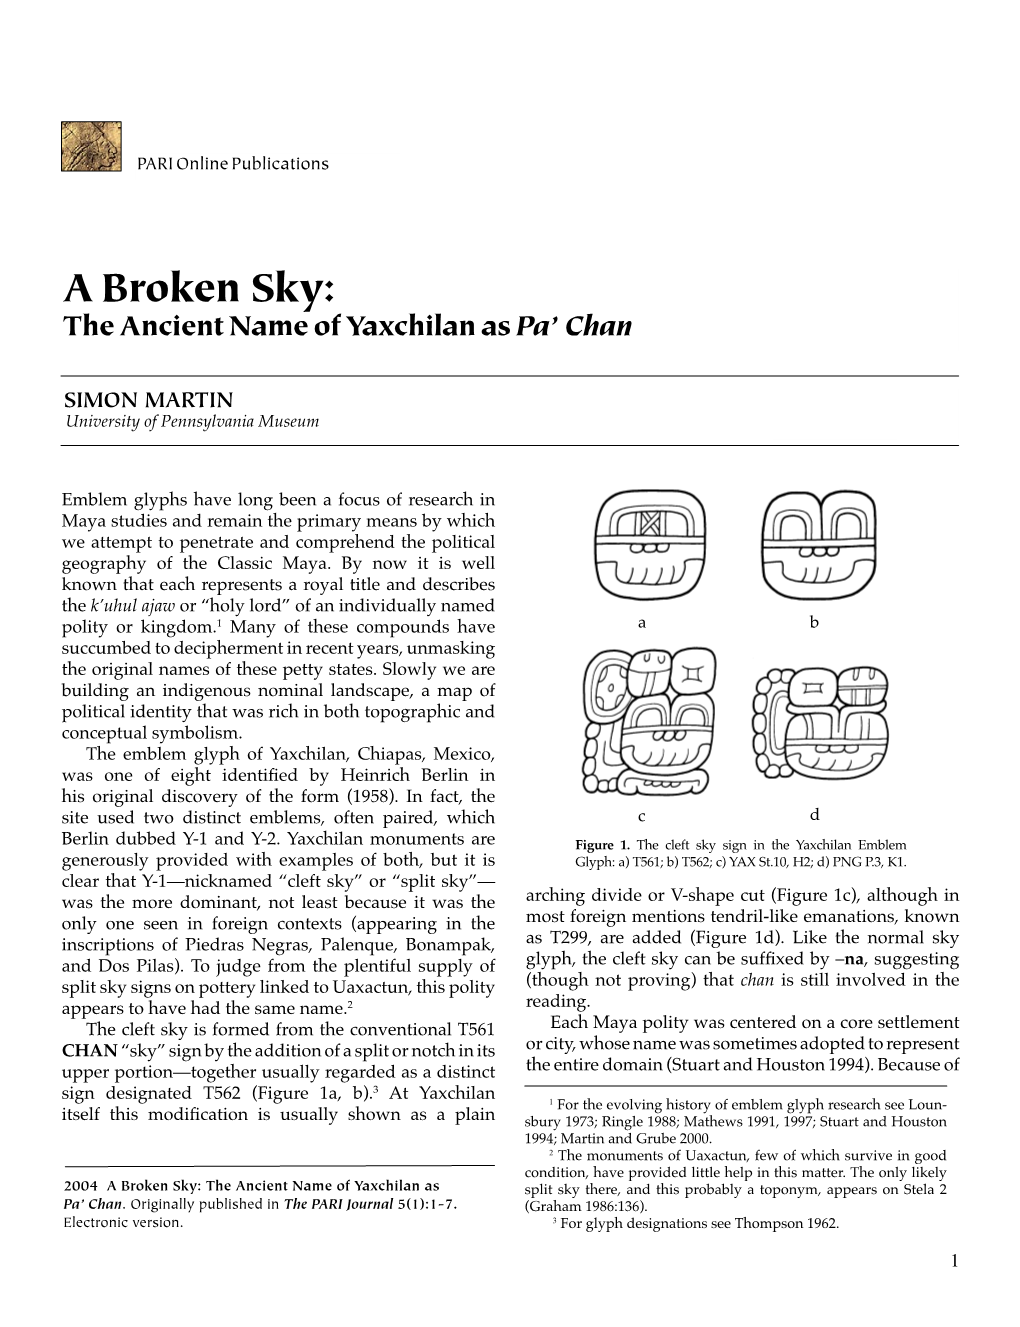 A Broken Sky: the Ancient Name of Yaxchilan As Pa’ Chan